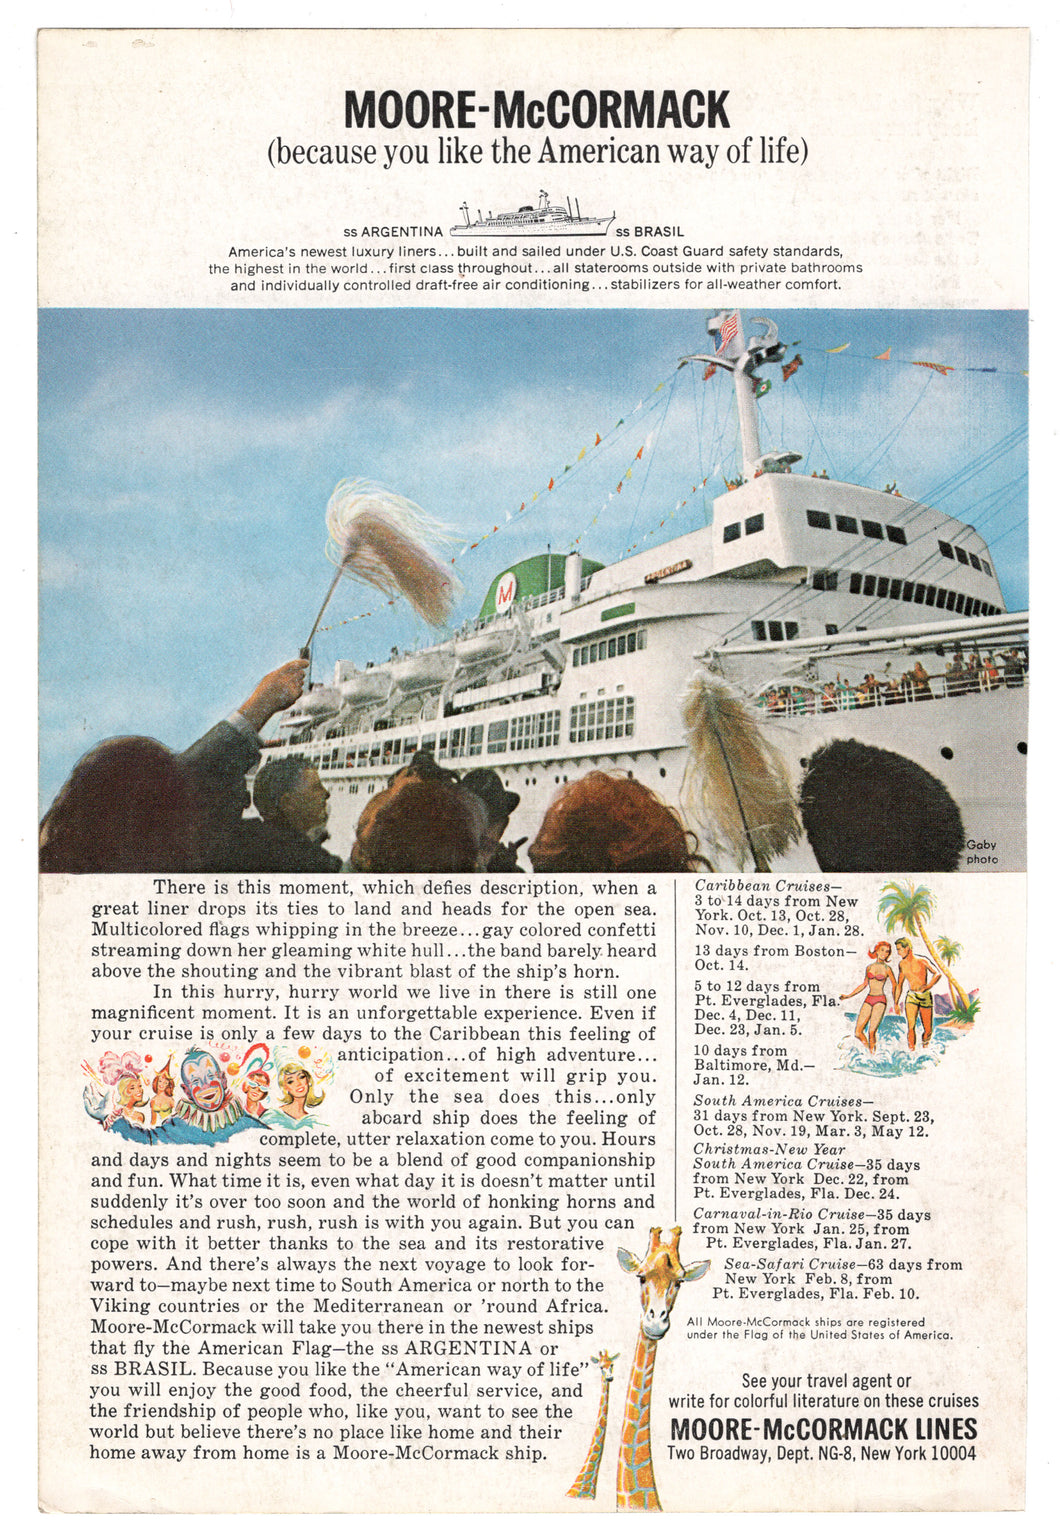 Moore-McCormack Cruise Lines Vintage Ad - (Cruising on the SS Argentina) # 469 - 1960's